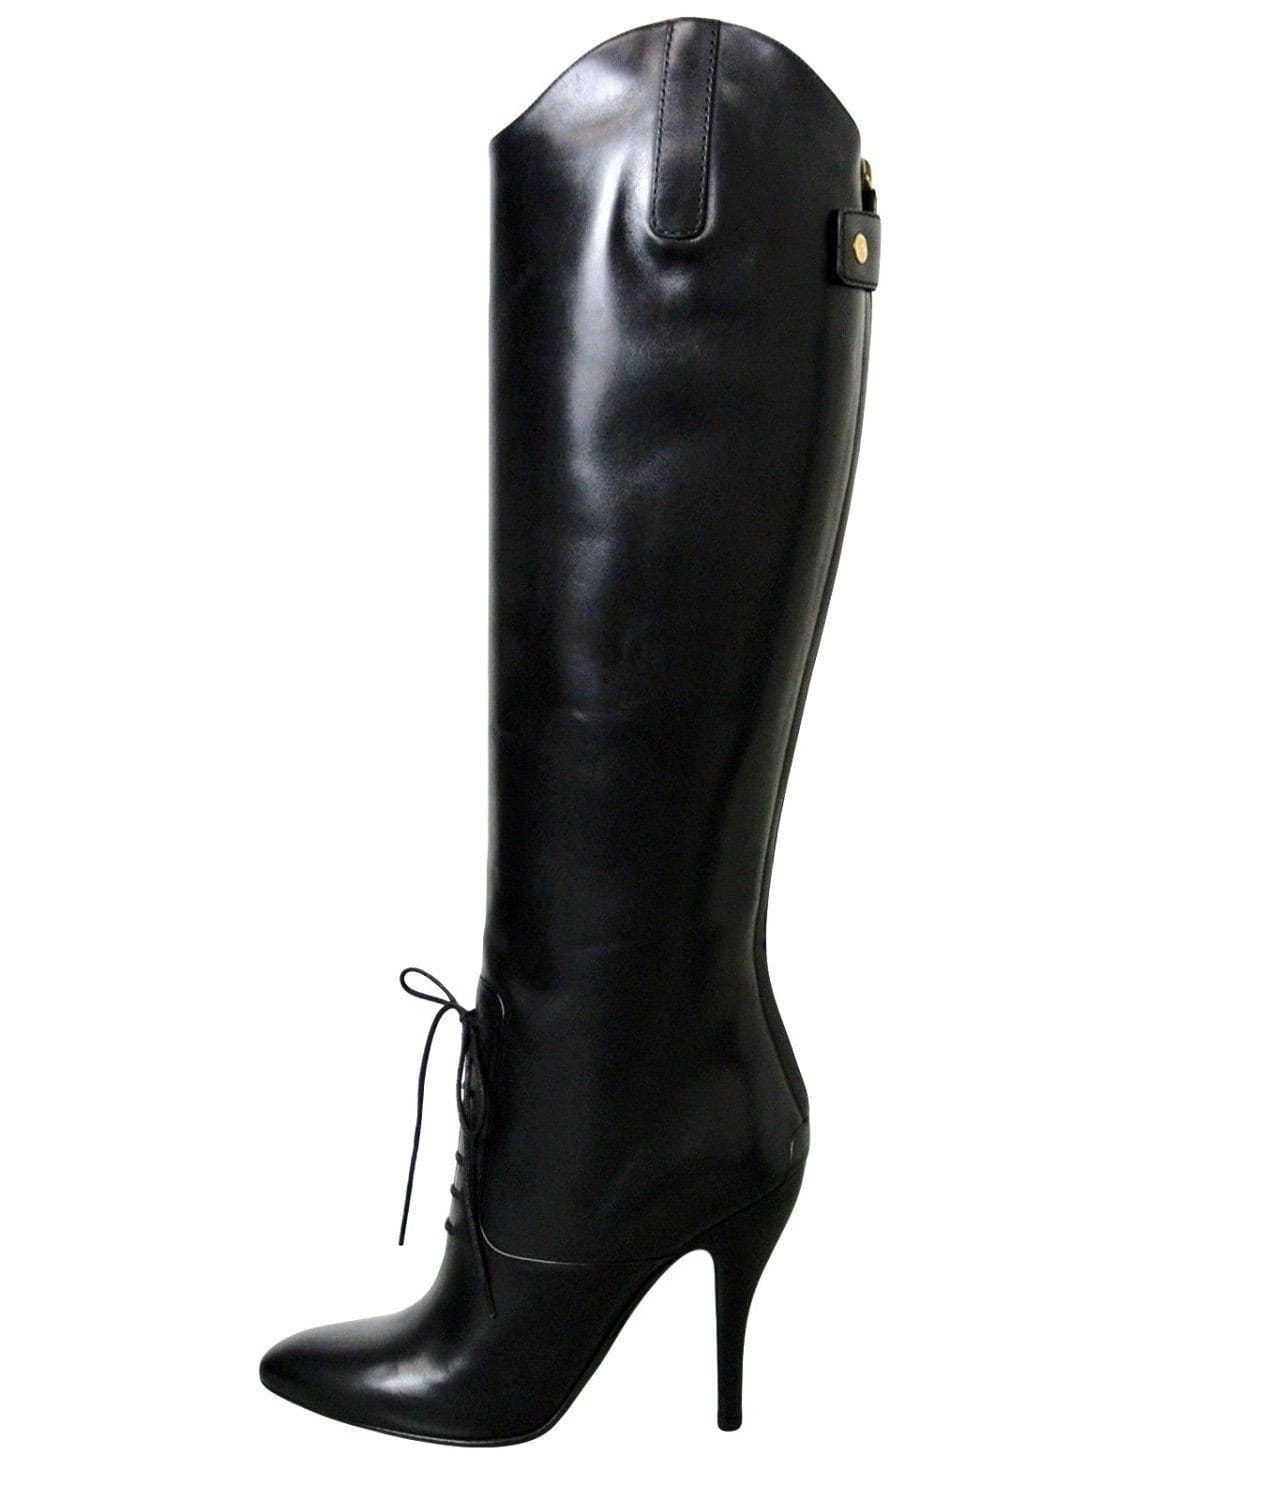 Louis Vuitton women's Free high boot in leather